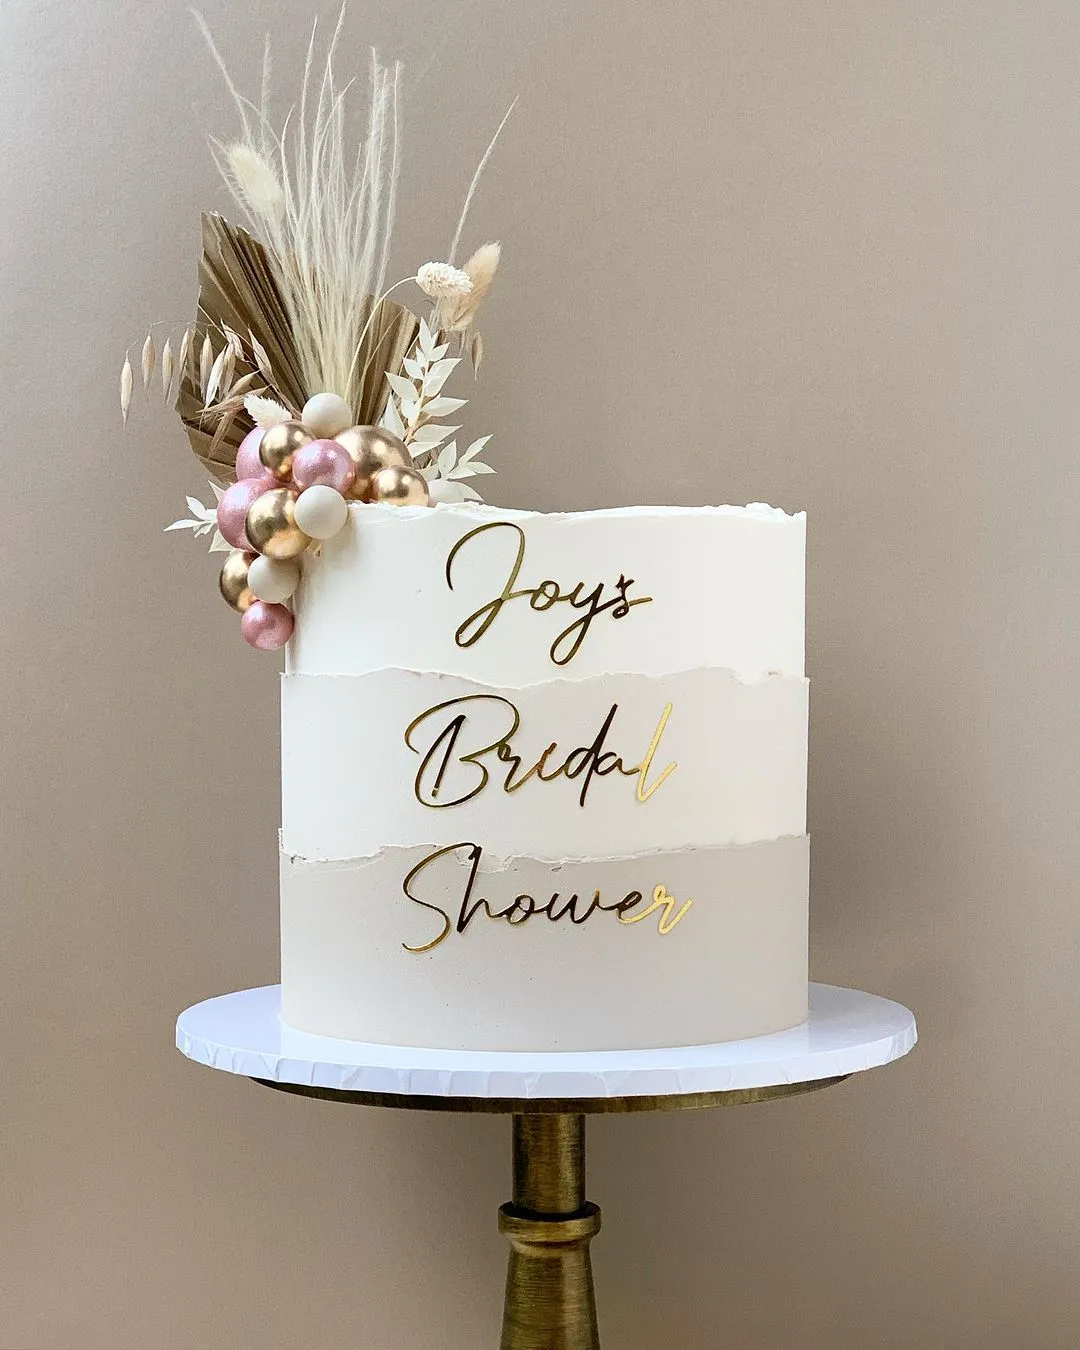 single cake with layered colors and simple bridal shower writing